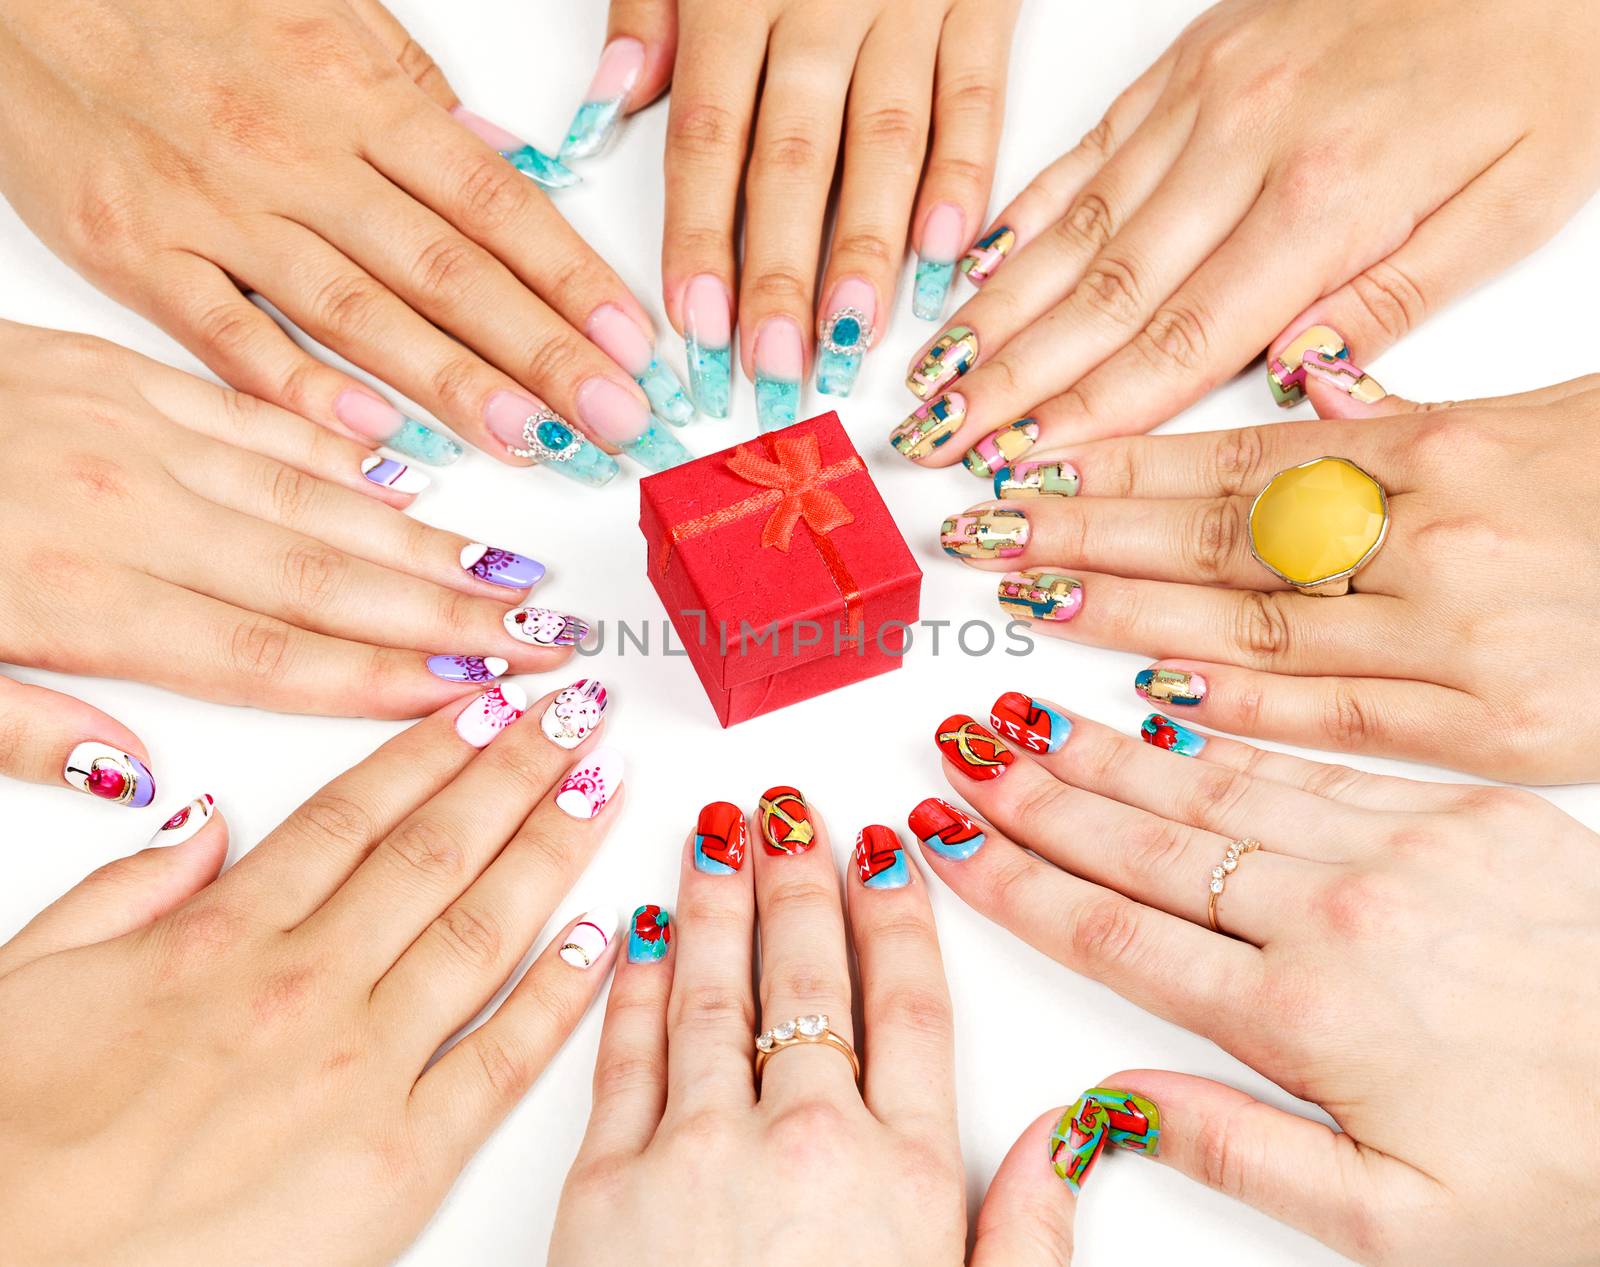 Female hands with various nail arts by Nobilior